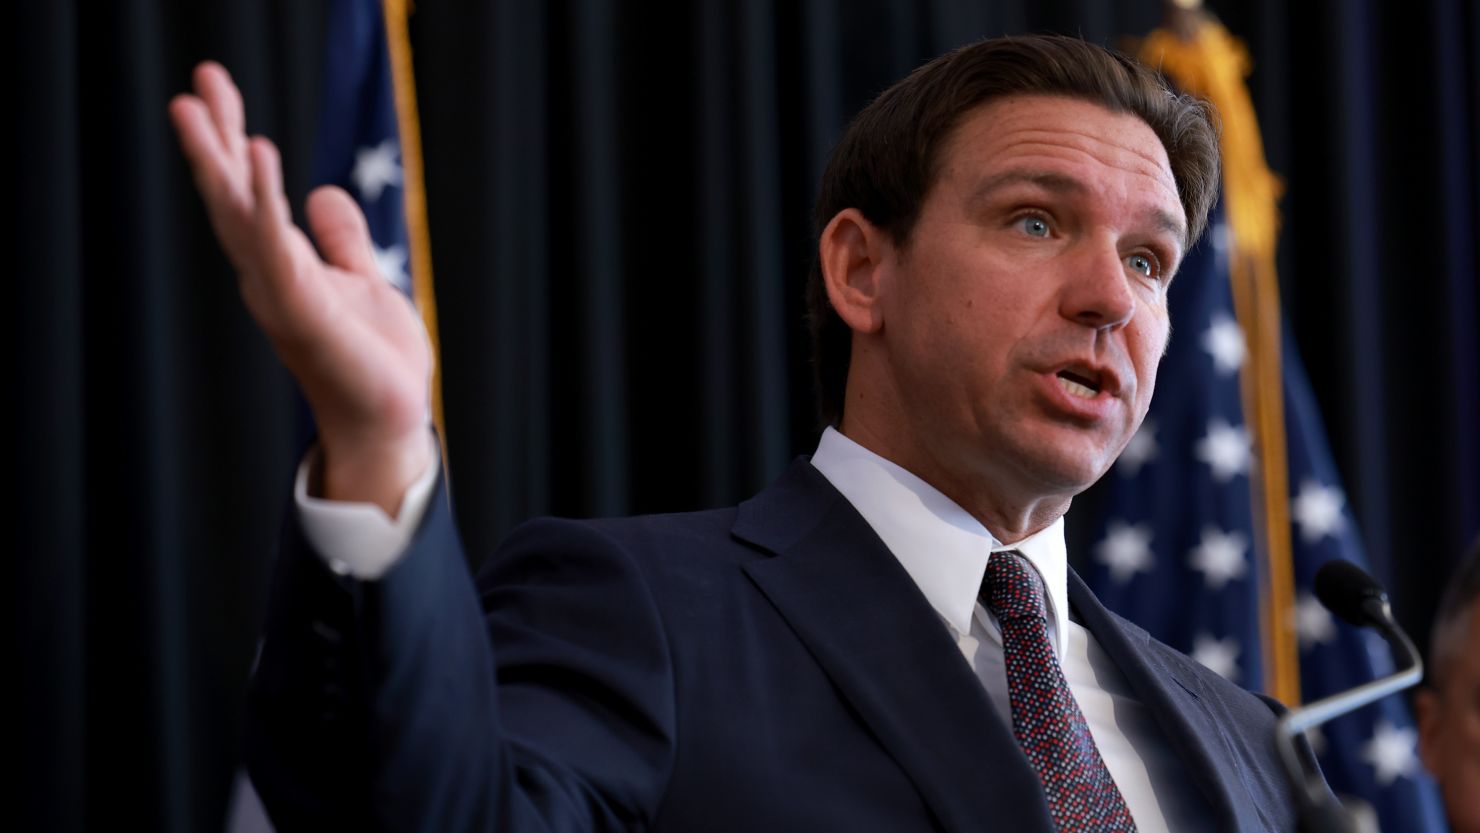 Desantis Calls For Institutionalizing More People Instead Of Nationalizing Floridas Red Flag 0664